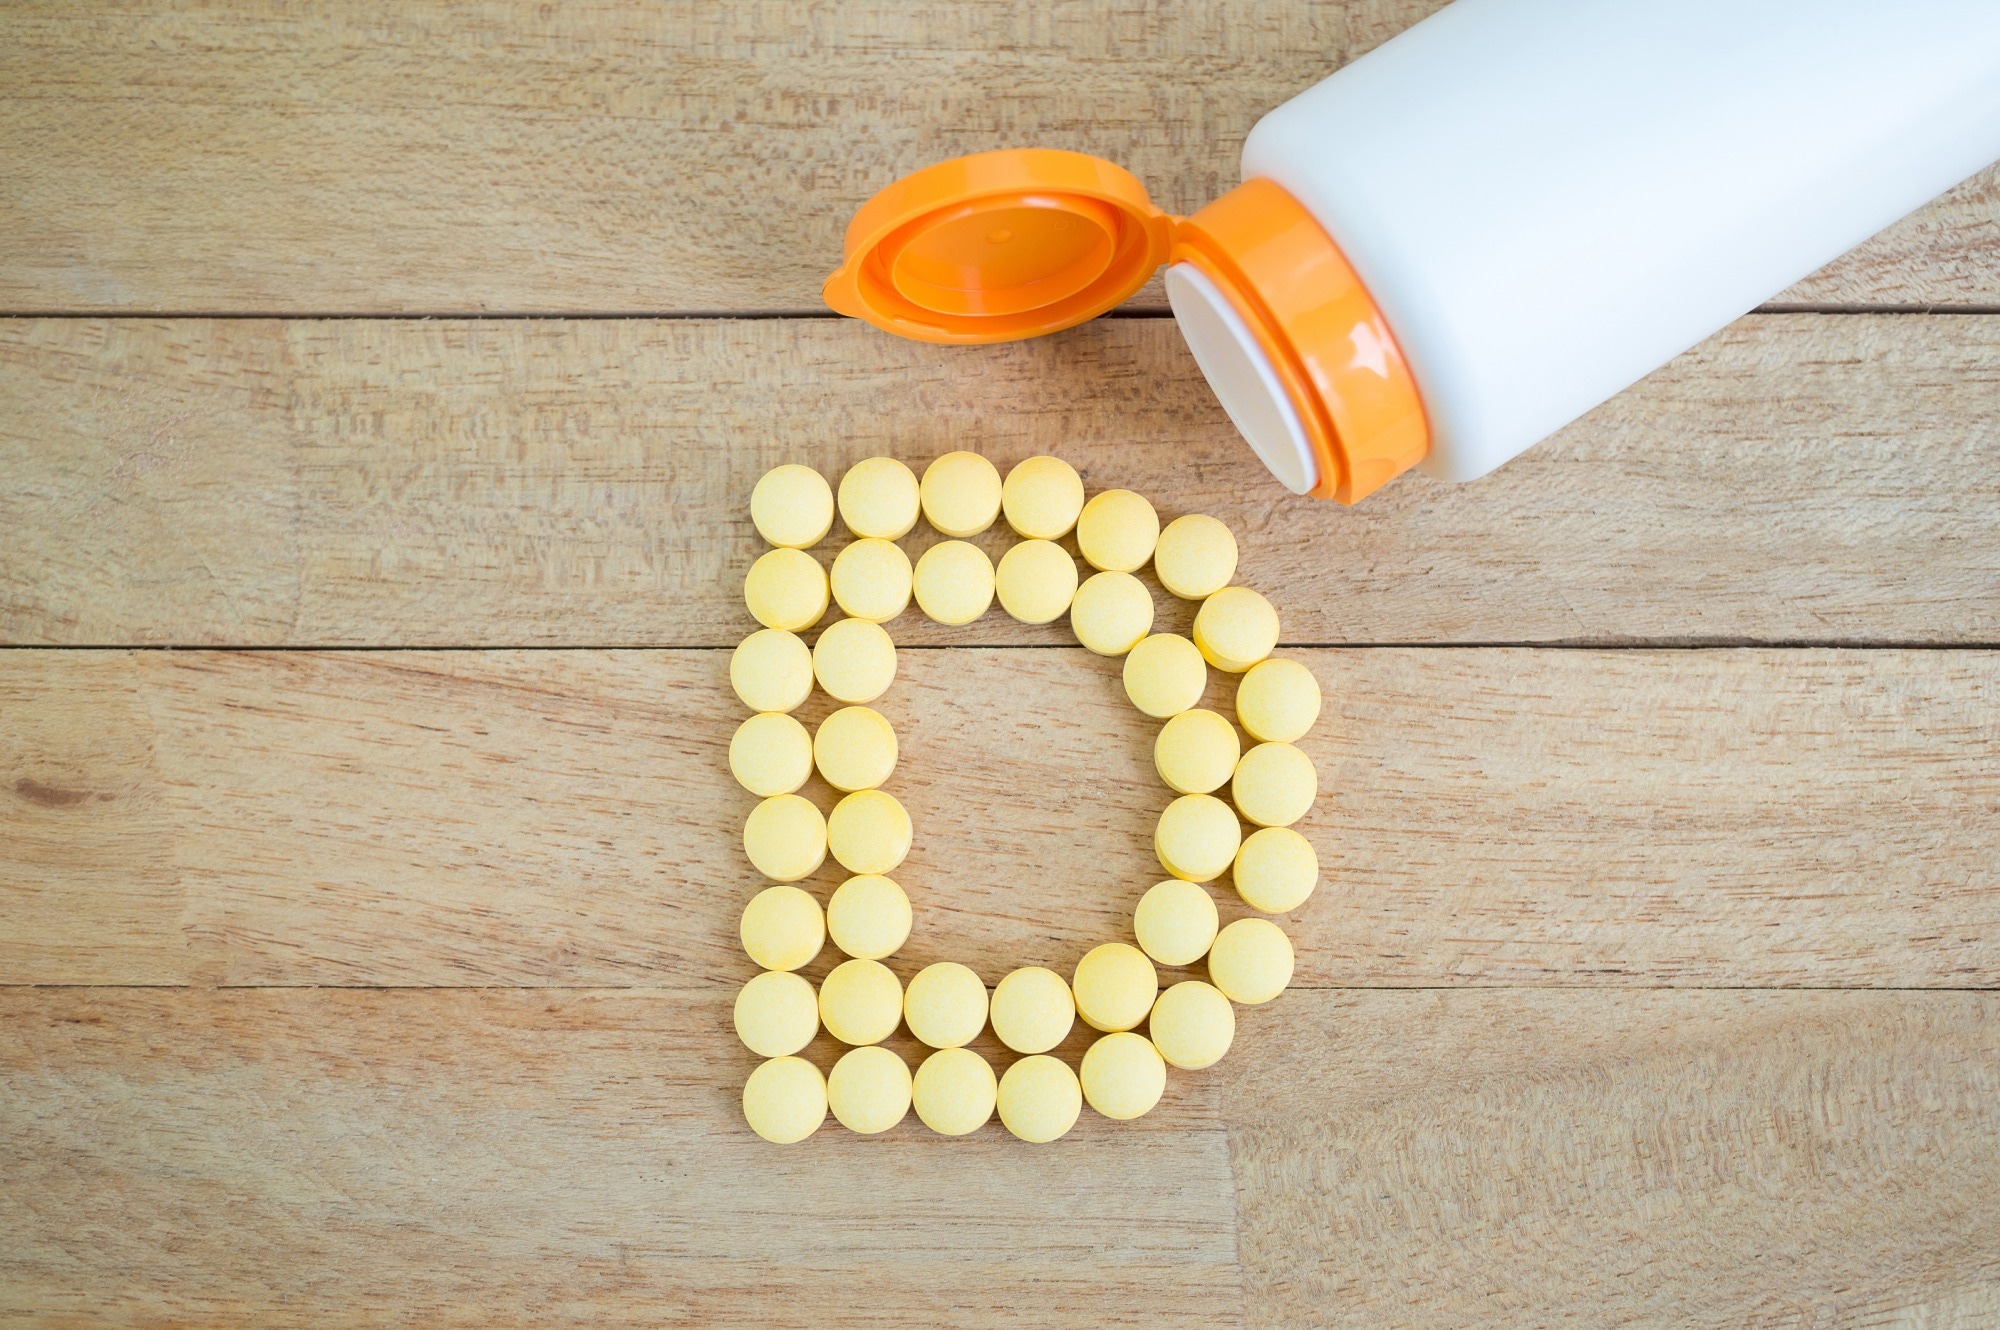 Study: Classification of Vitamin D Status Based on Vitamin D Metabolism: A Randomized Controlled Trial in Hypertensive Patients. Image Credit: NatchaS / Shutterstock